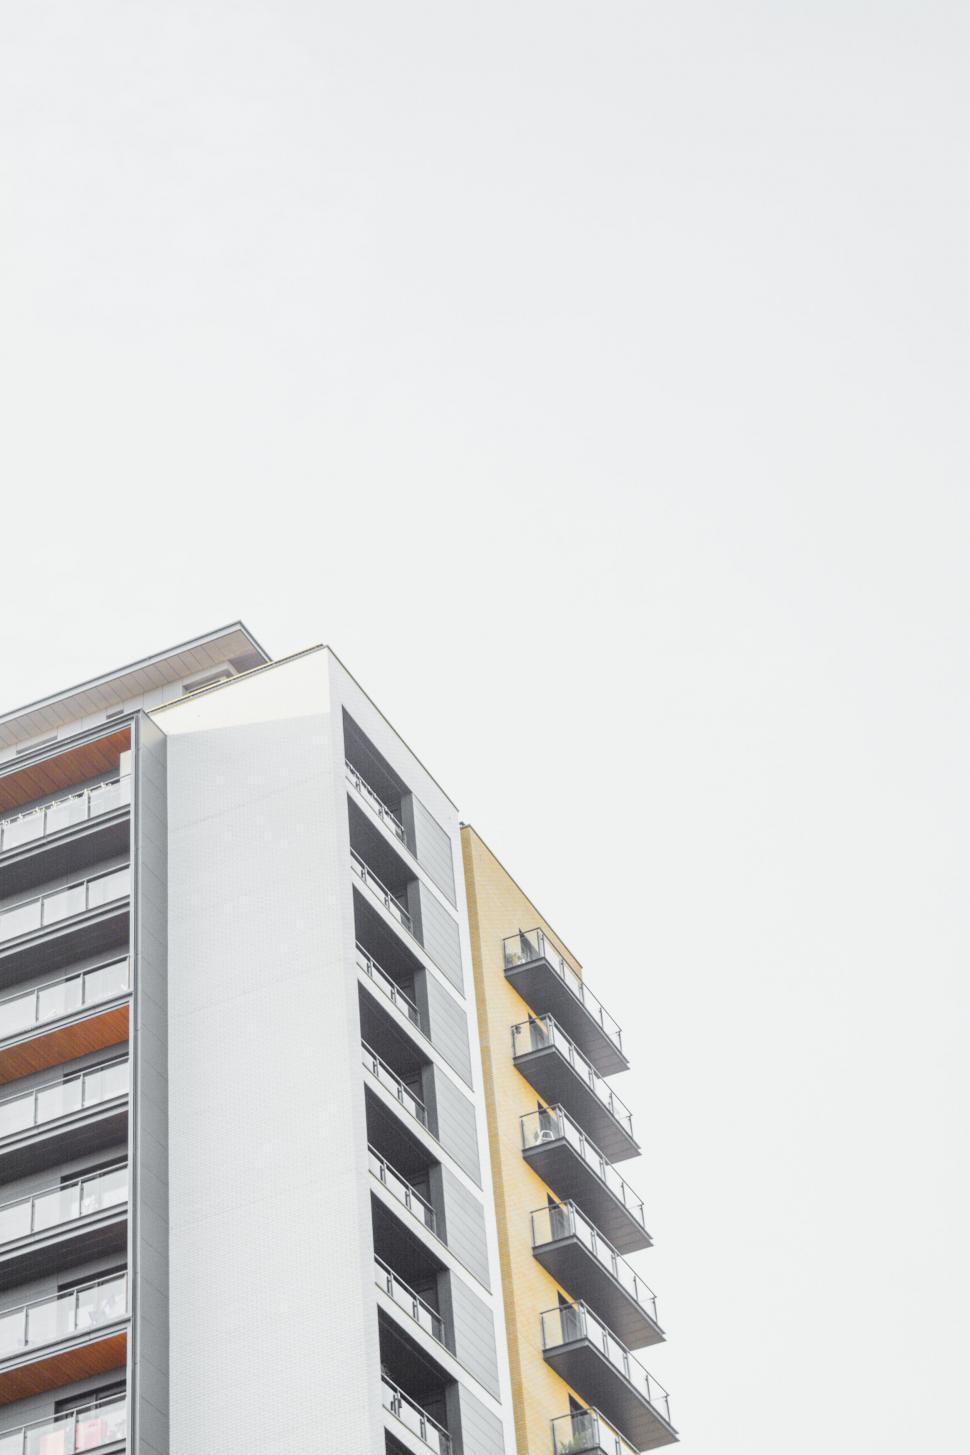 Free Image of A couple of buildings with balconies 